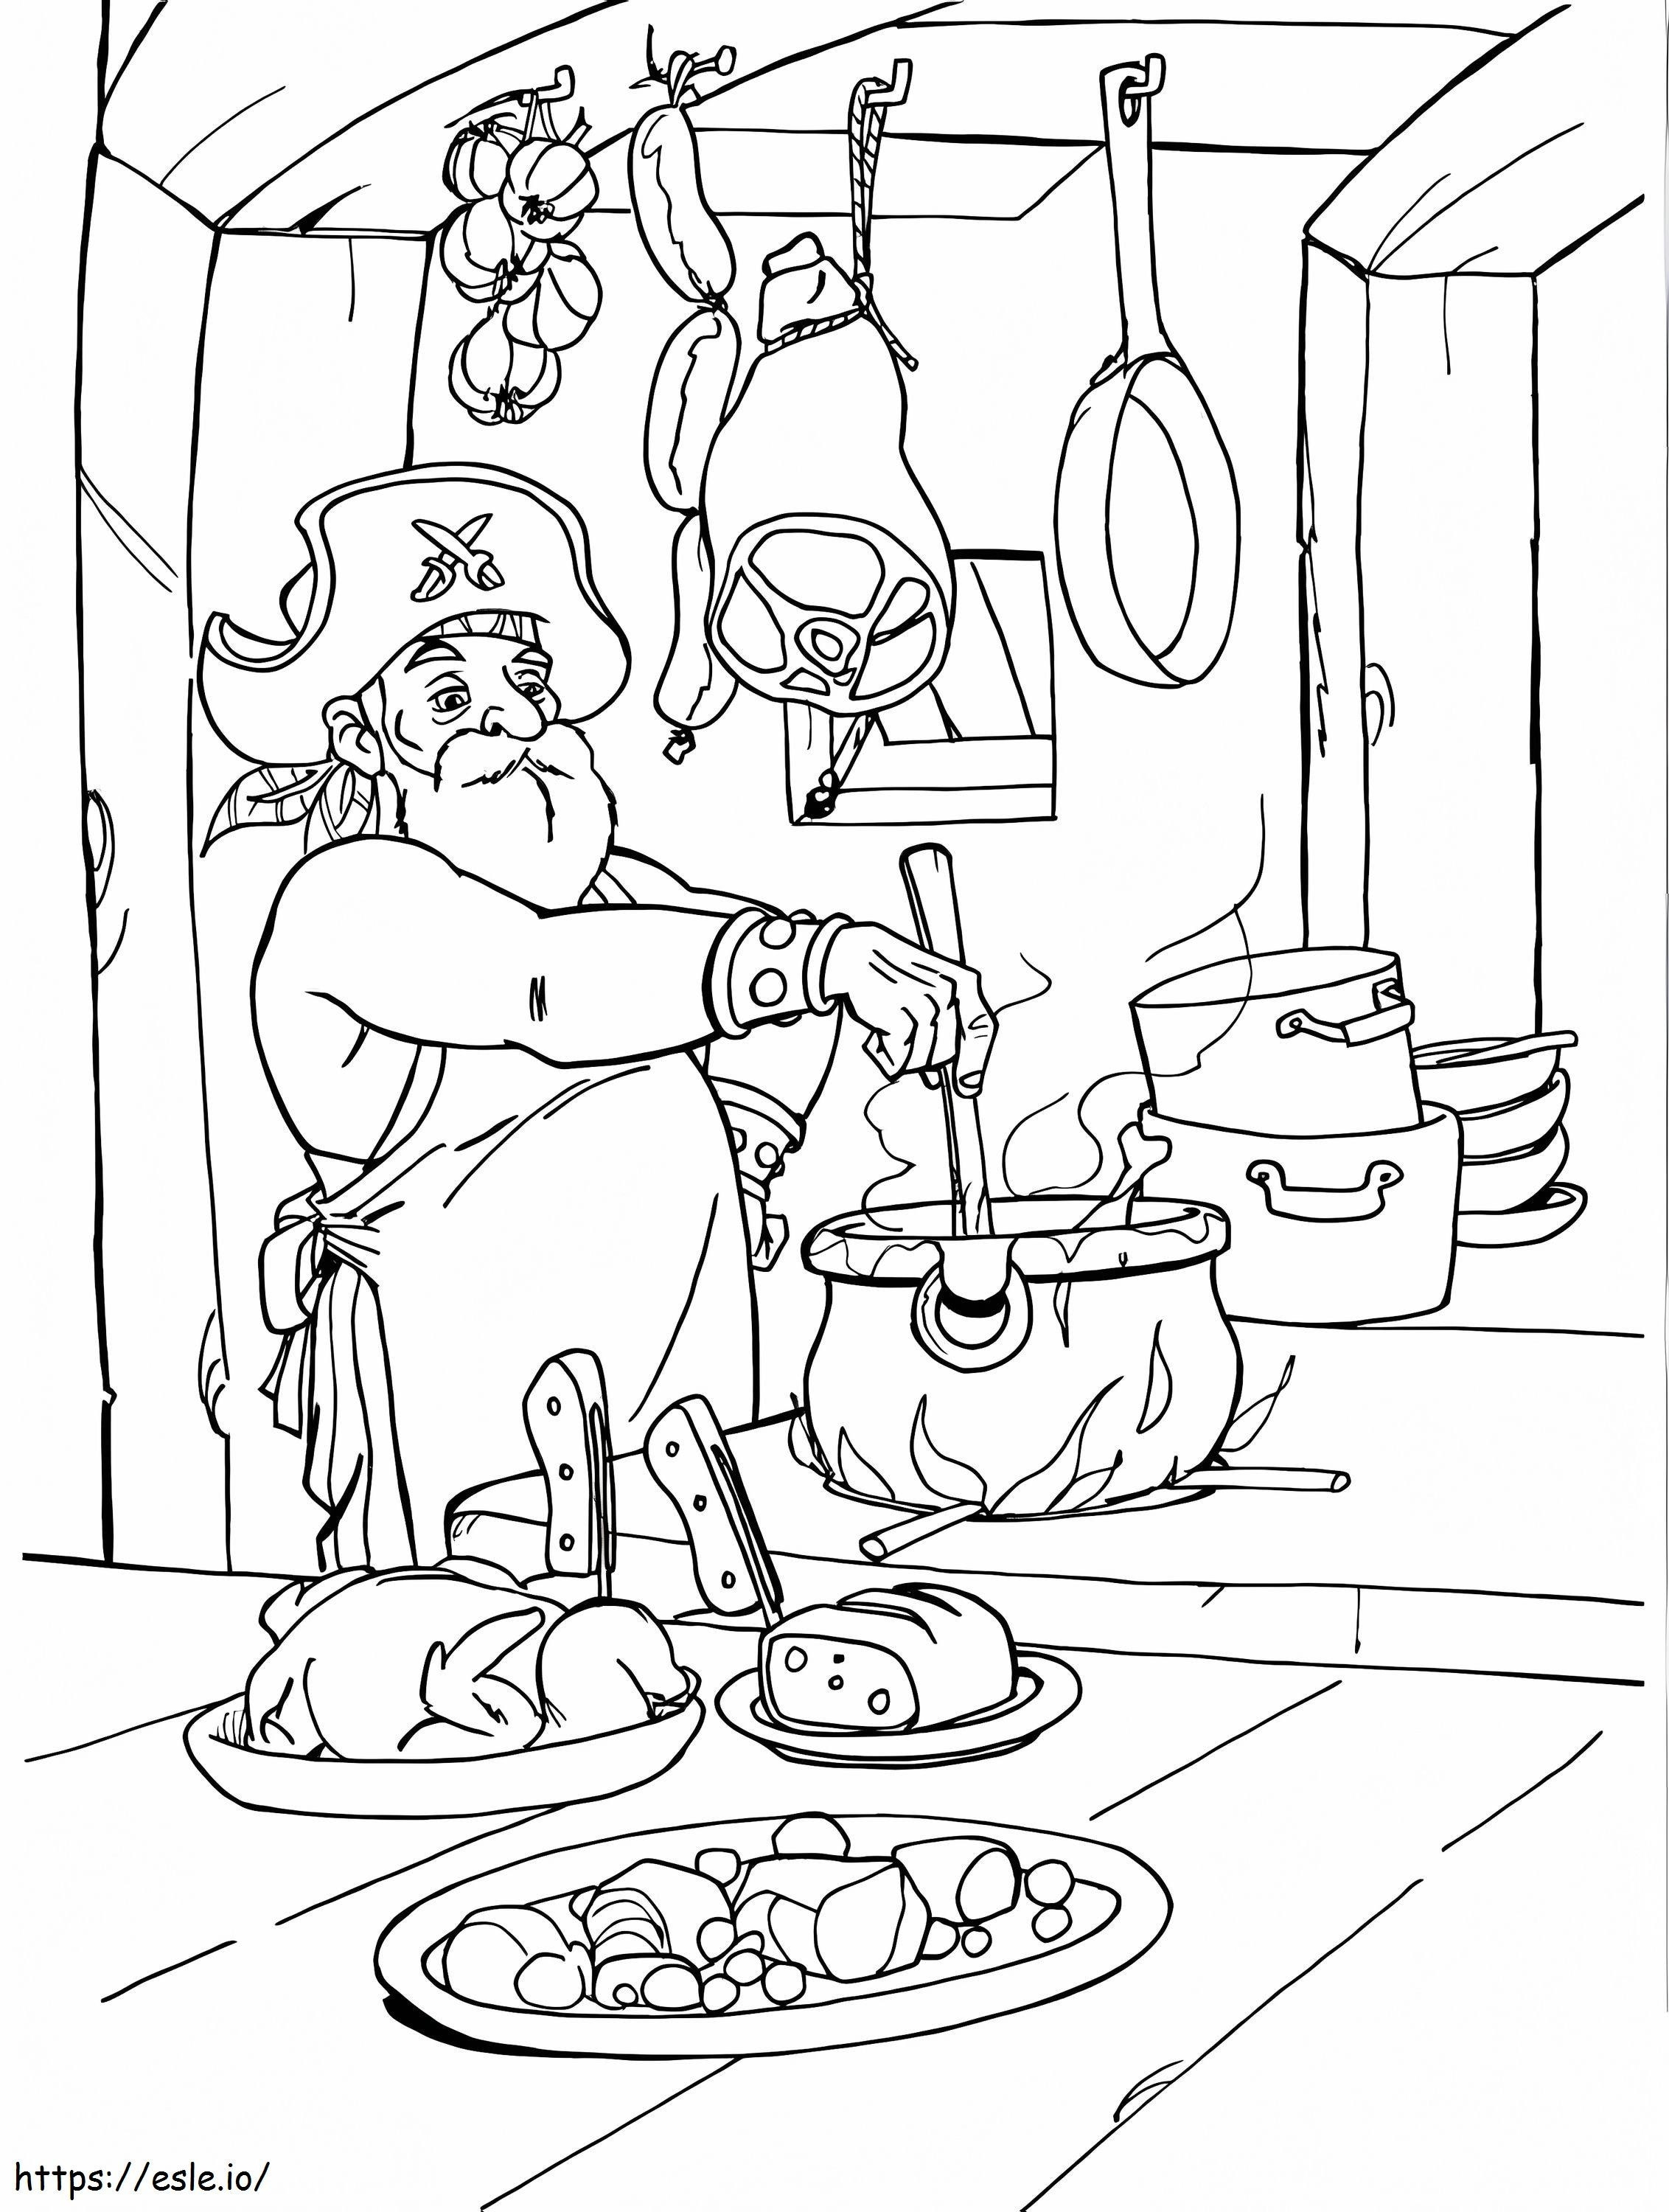 Pirate Cook coloring page